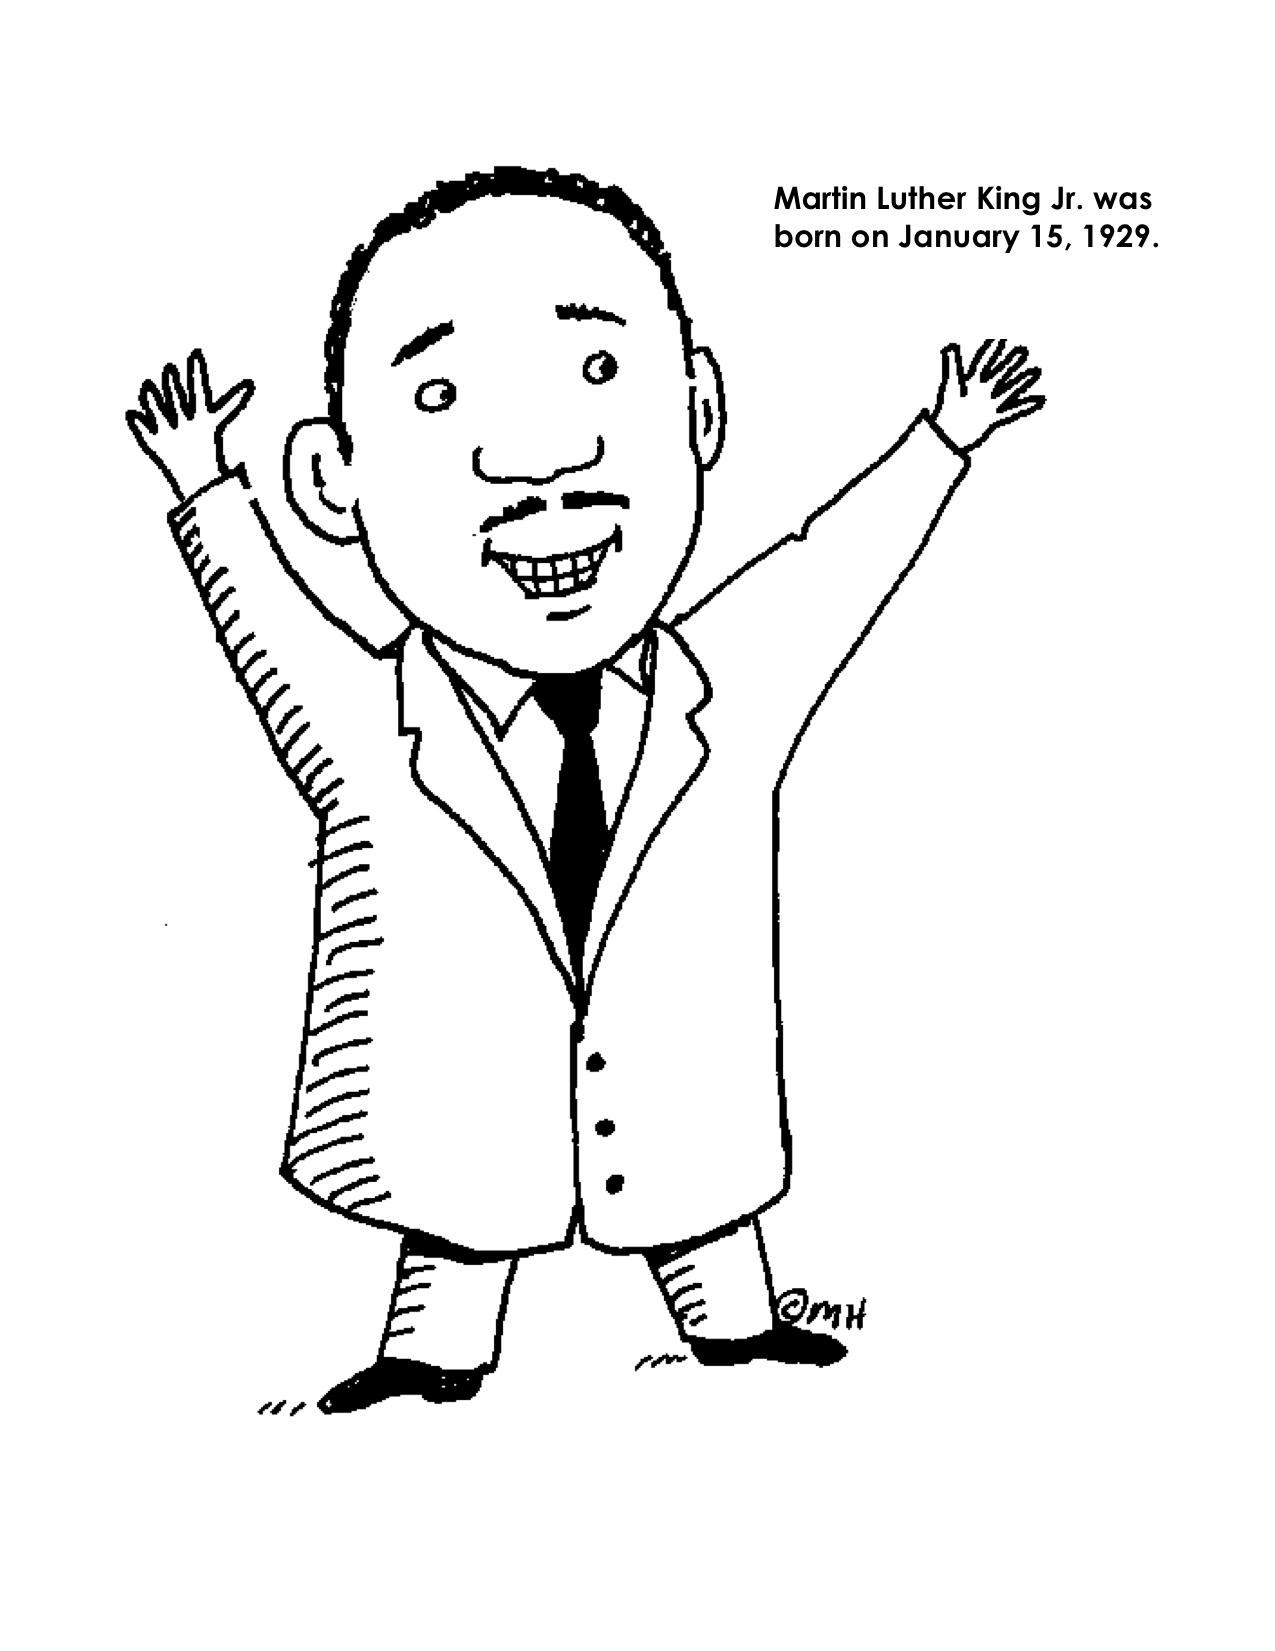 Martin Luther King Jr Coloring Pages And Worksheets Best Coloring Pages For Kids